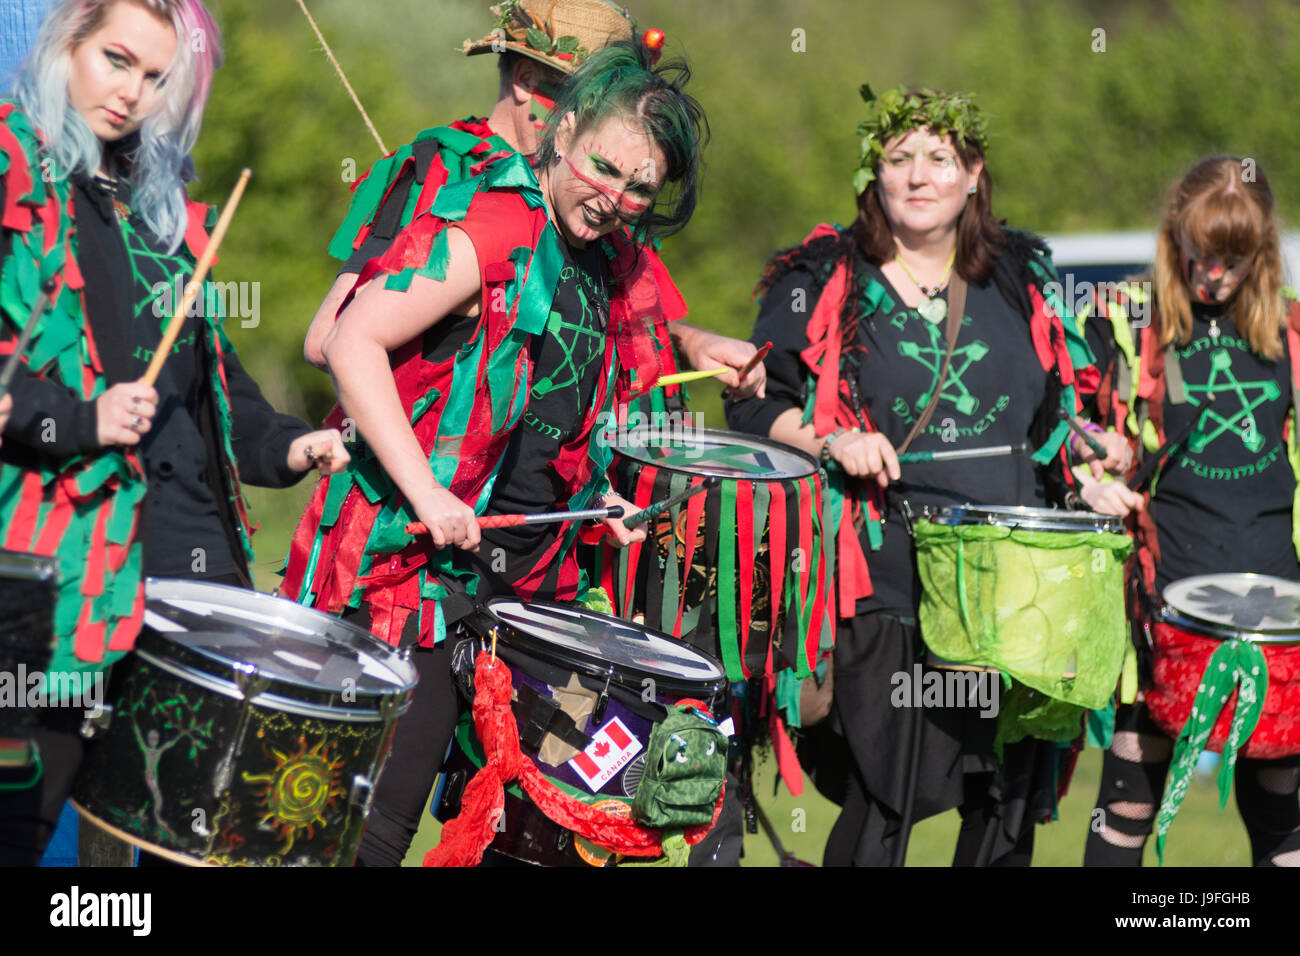 Pentacle Drummers at Betain Festival at Butser Ancient Farm, Hampshire, UK, April 2017 Stock Photo